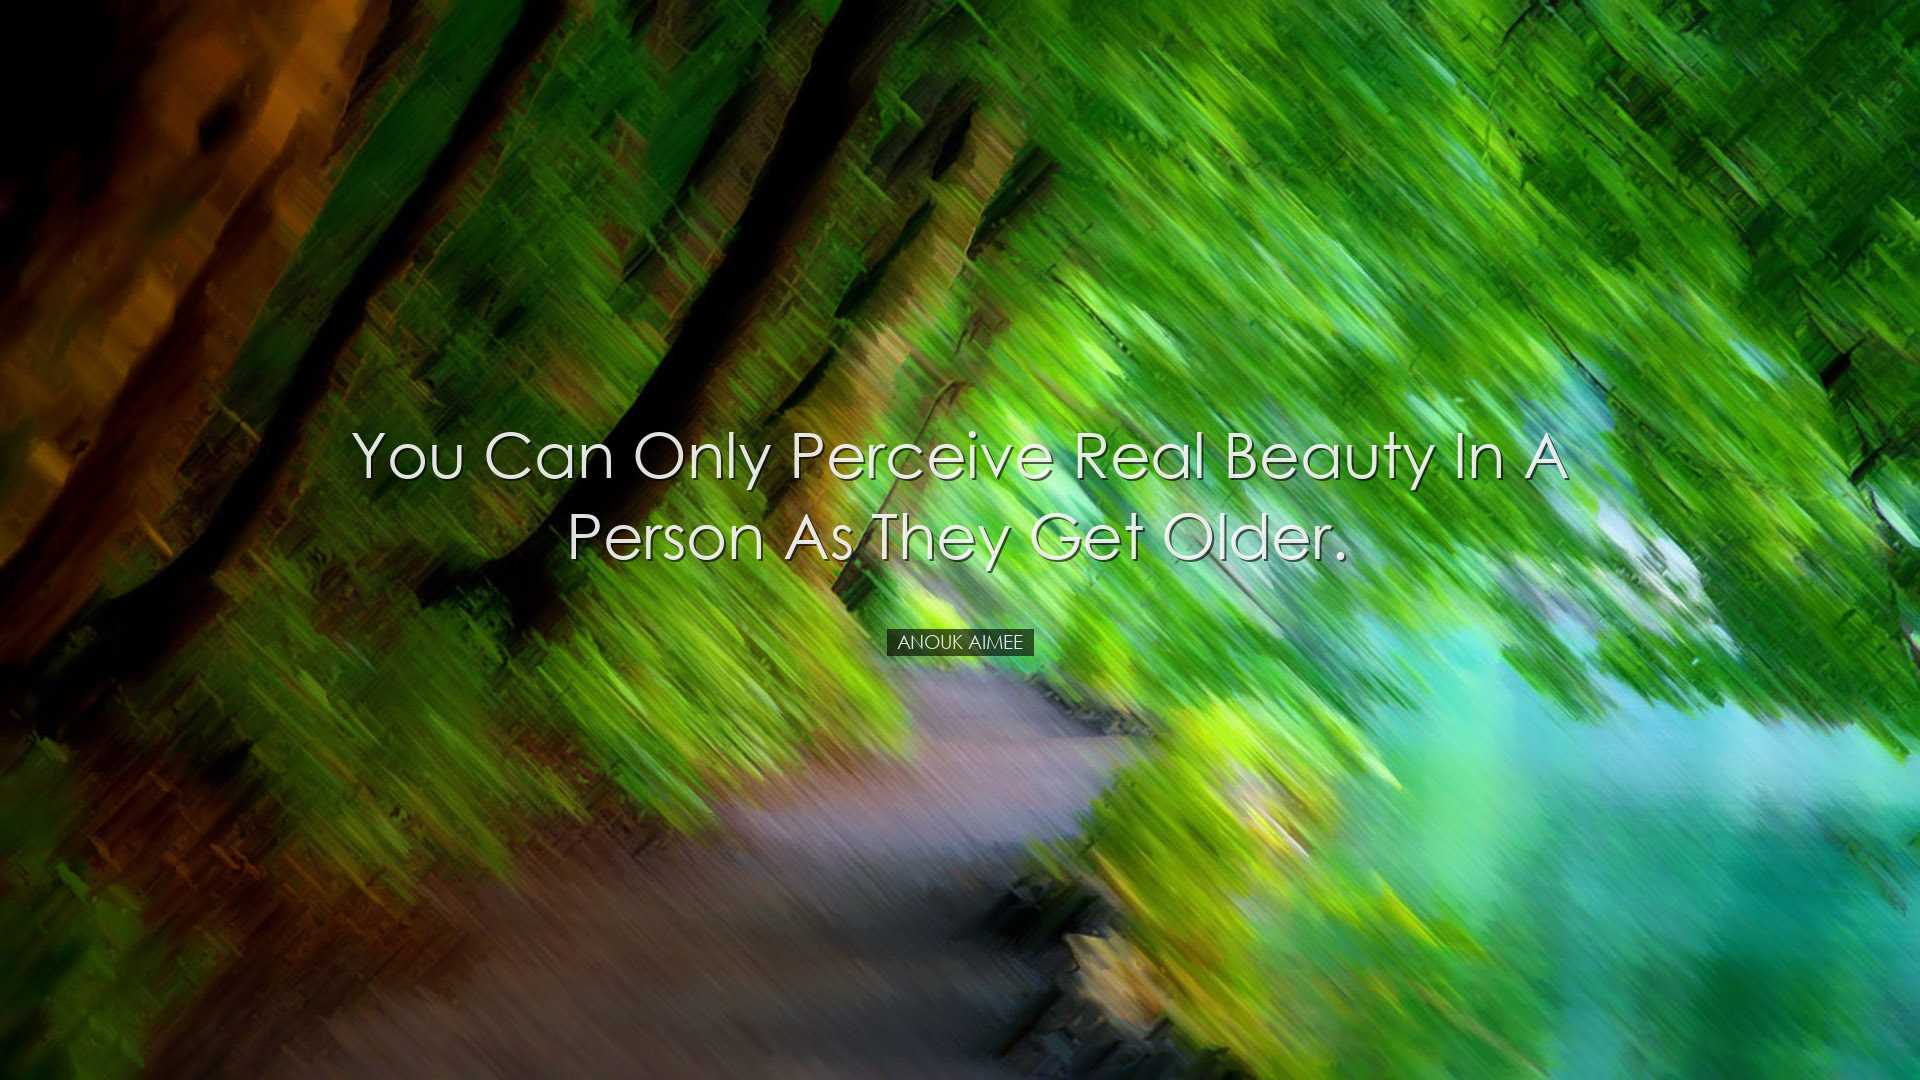 You can only perceive real beauty in a person as they get older. -